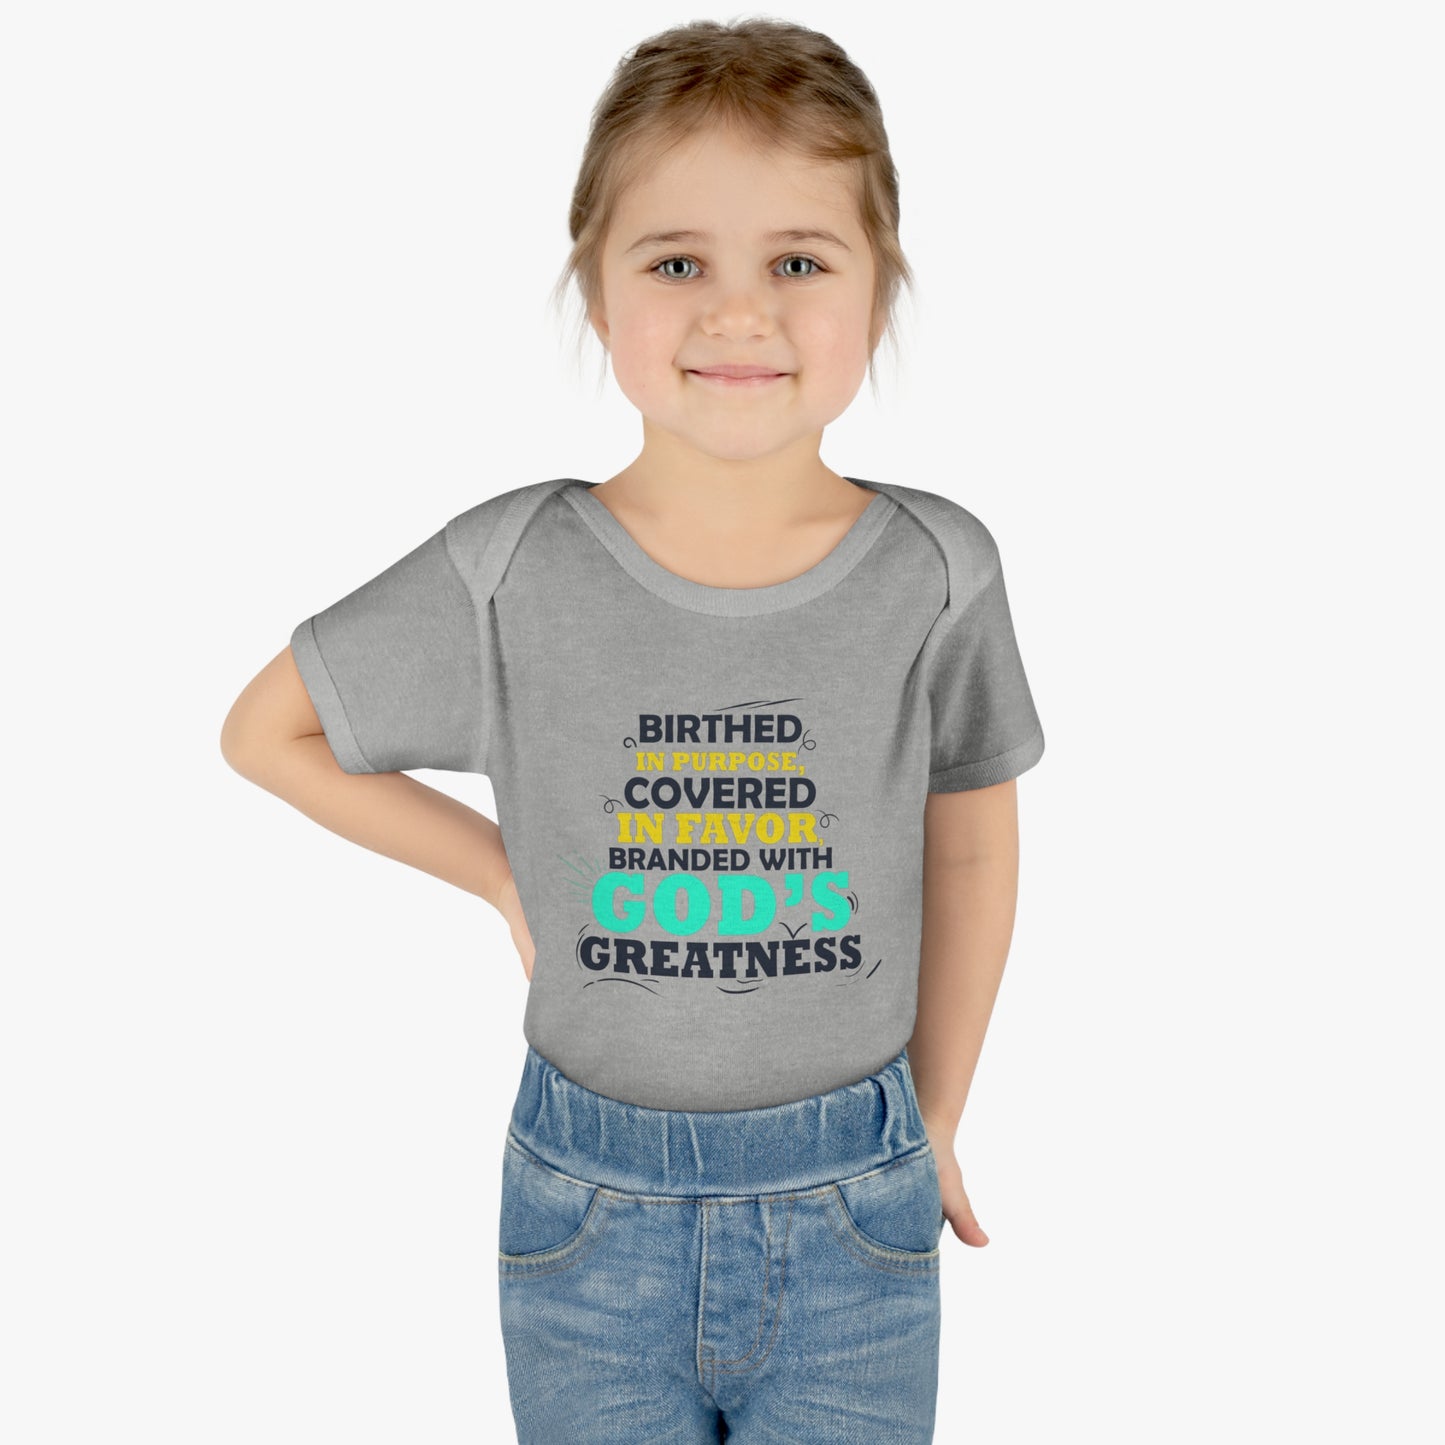 Birthed In Purpose Covered In Favor Branded With God's Greatness Christian Baby Onesie Printify